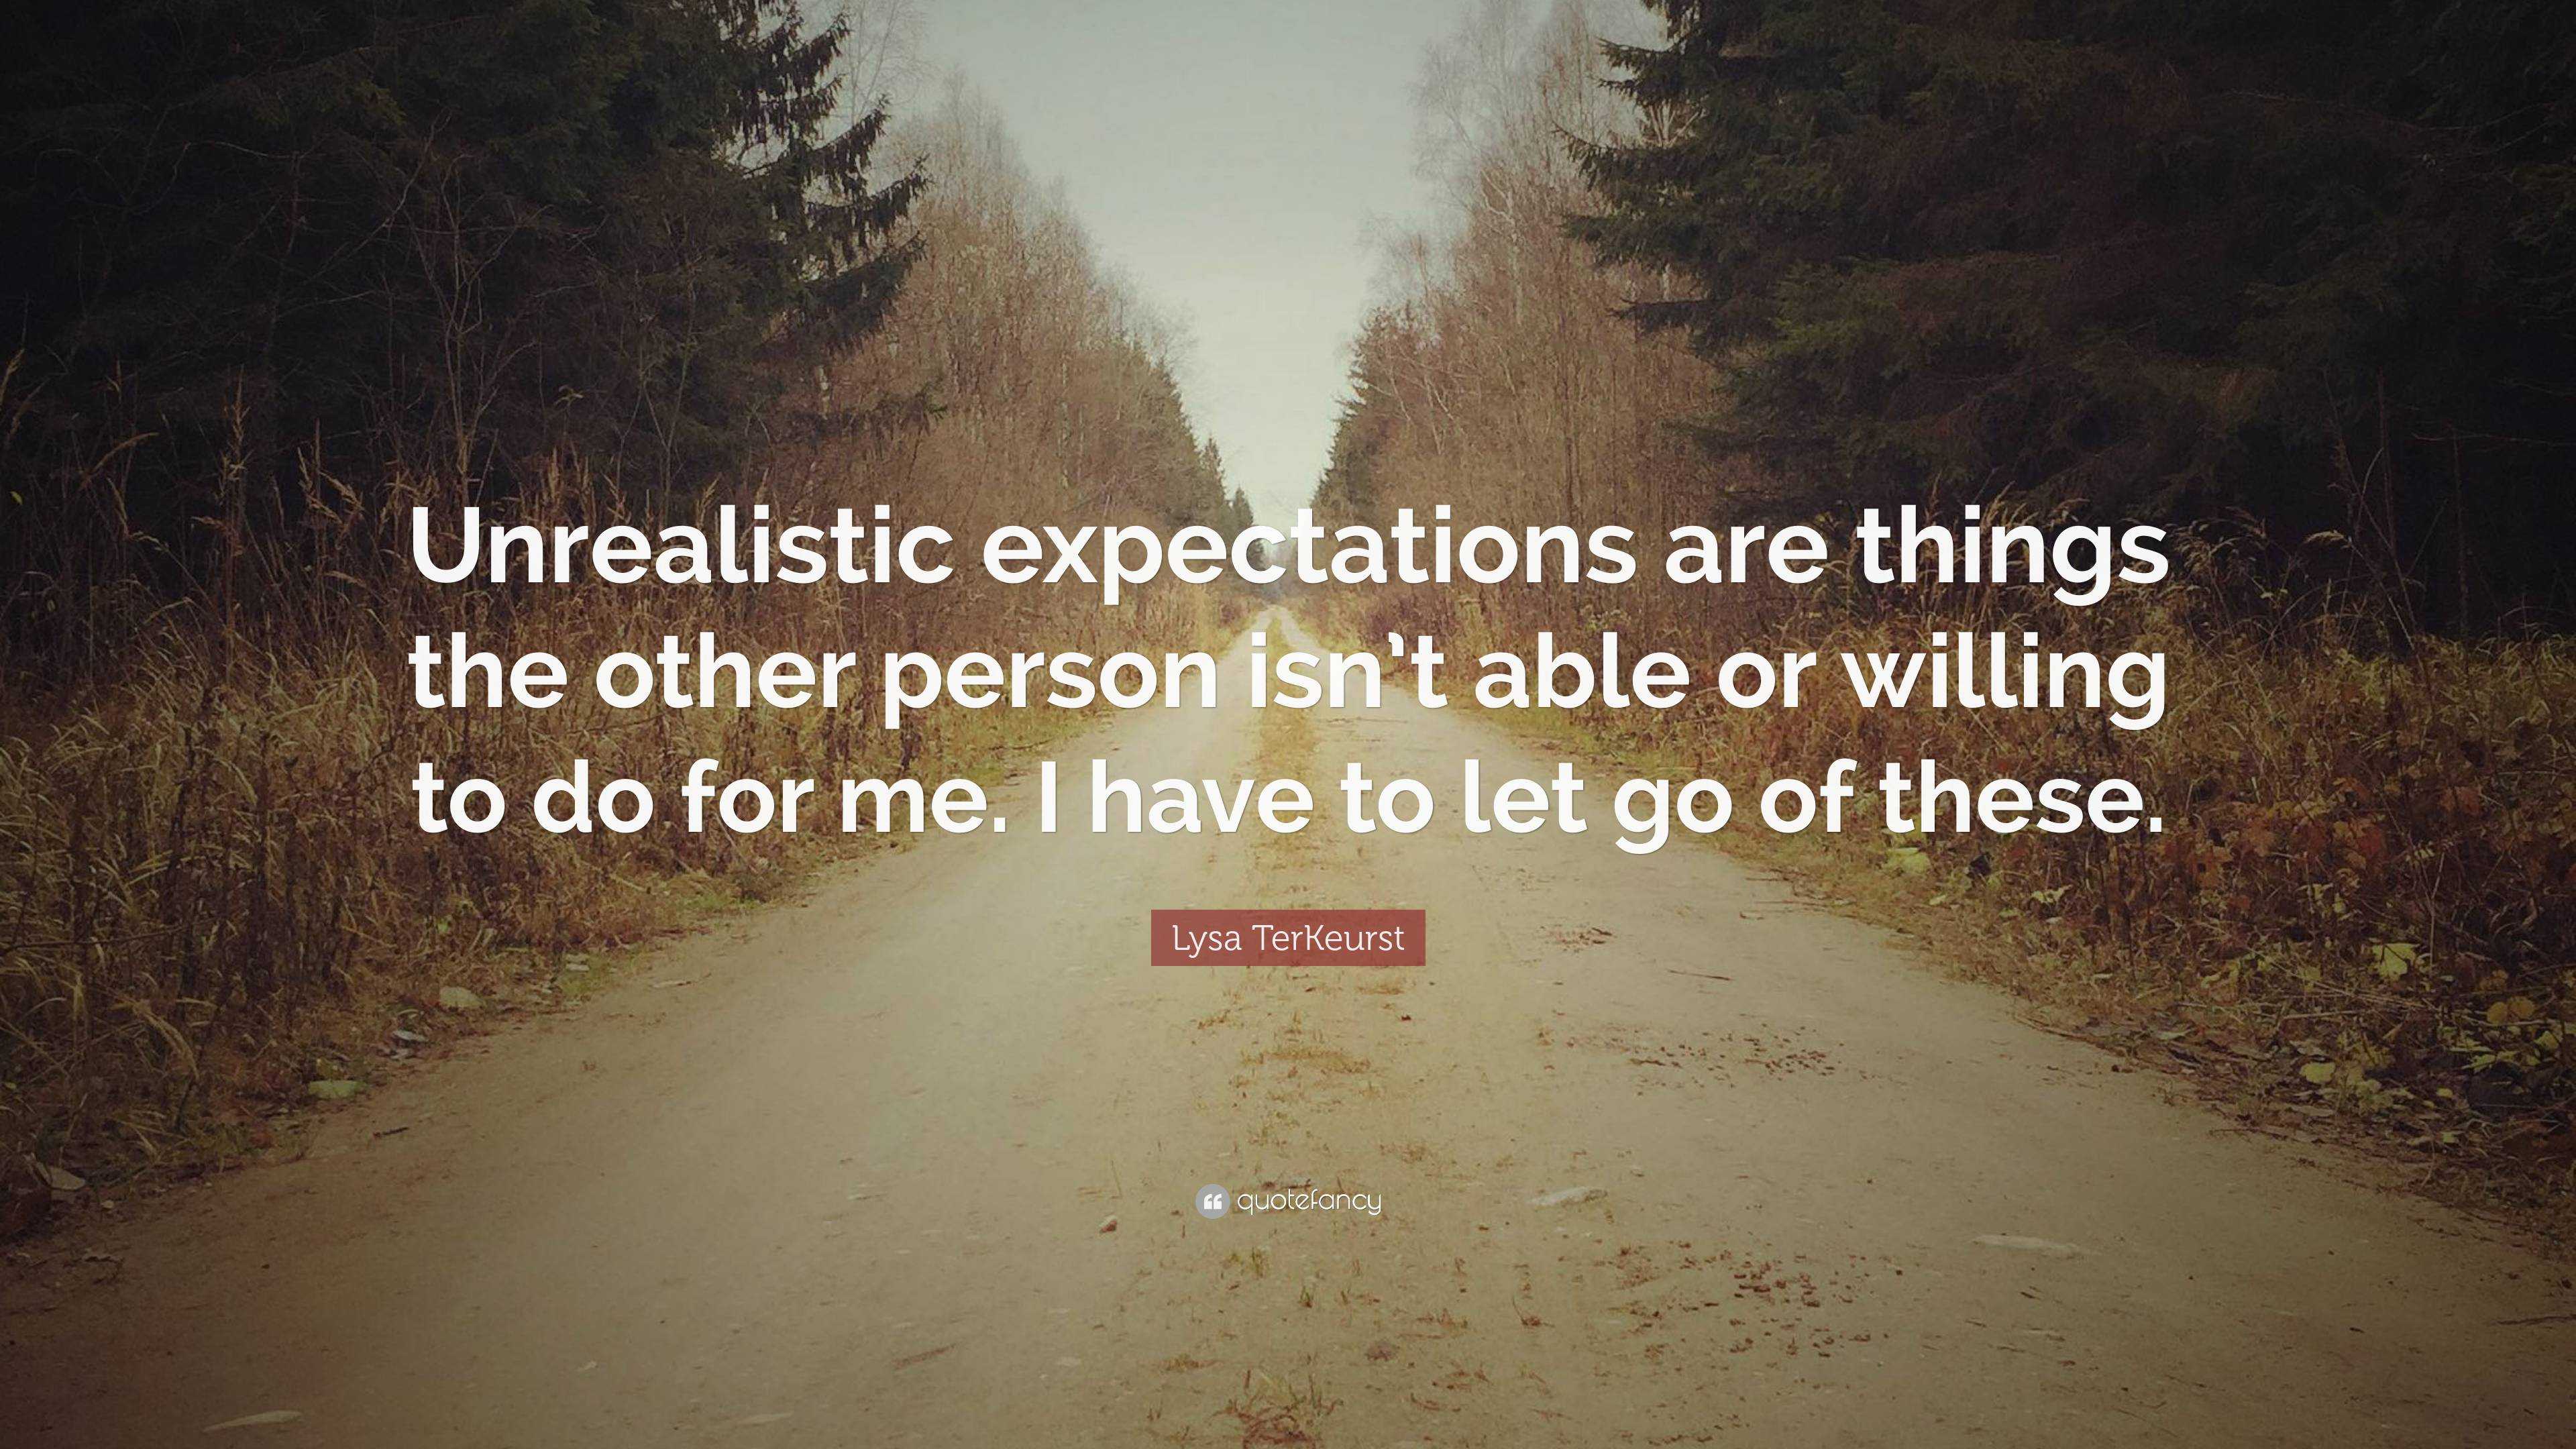 Lysa TerKeurst Quote: “Unrealistic expectations are things the other ...